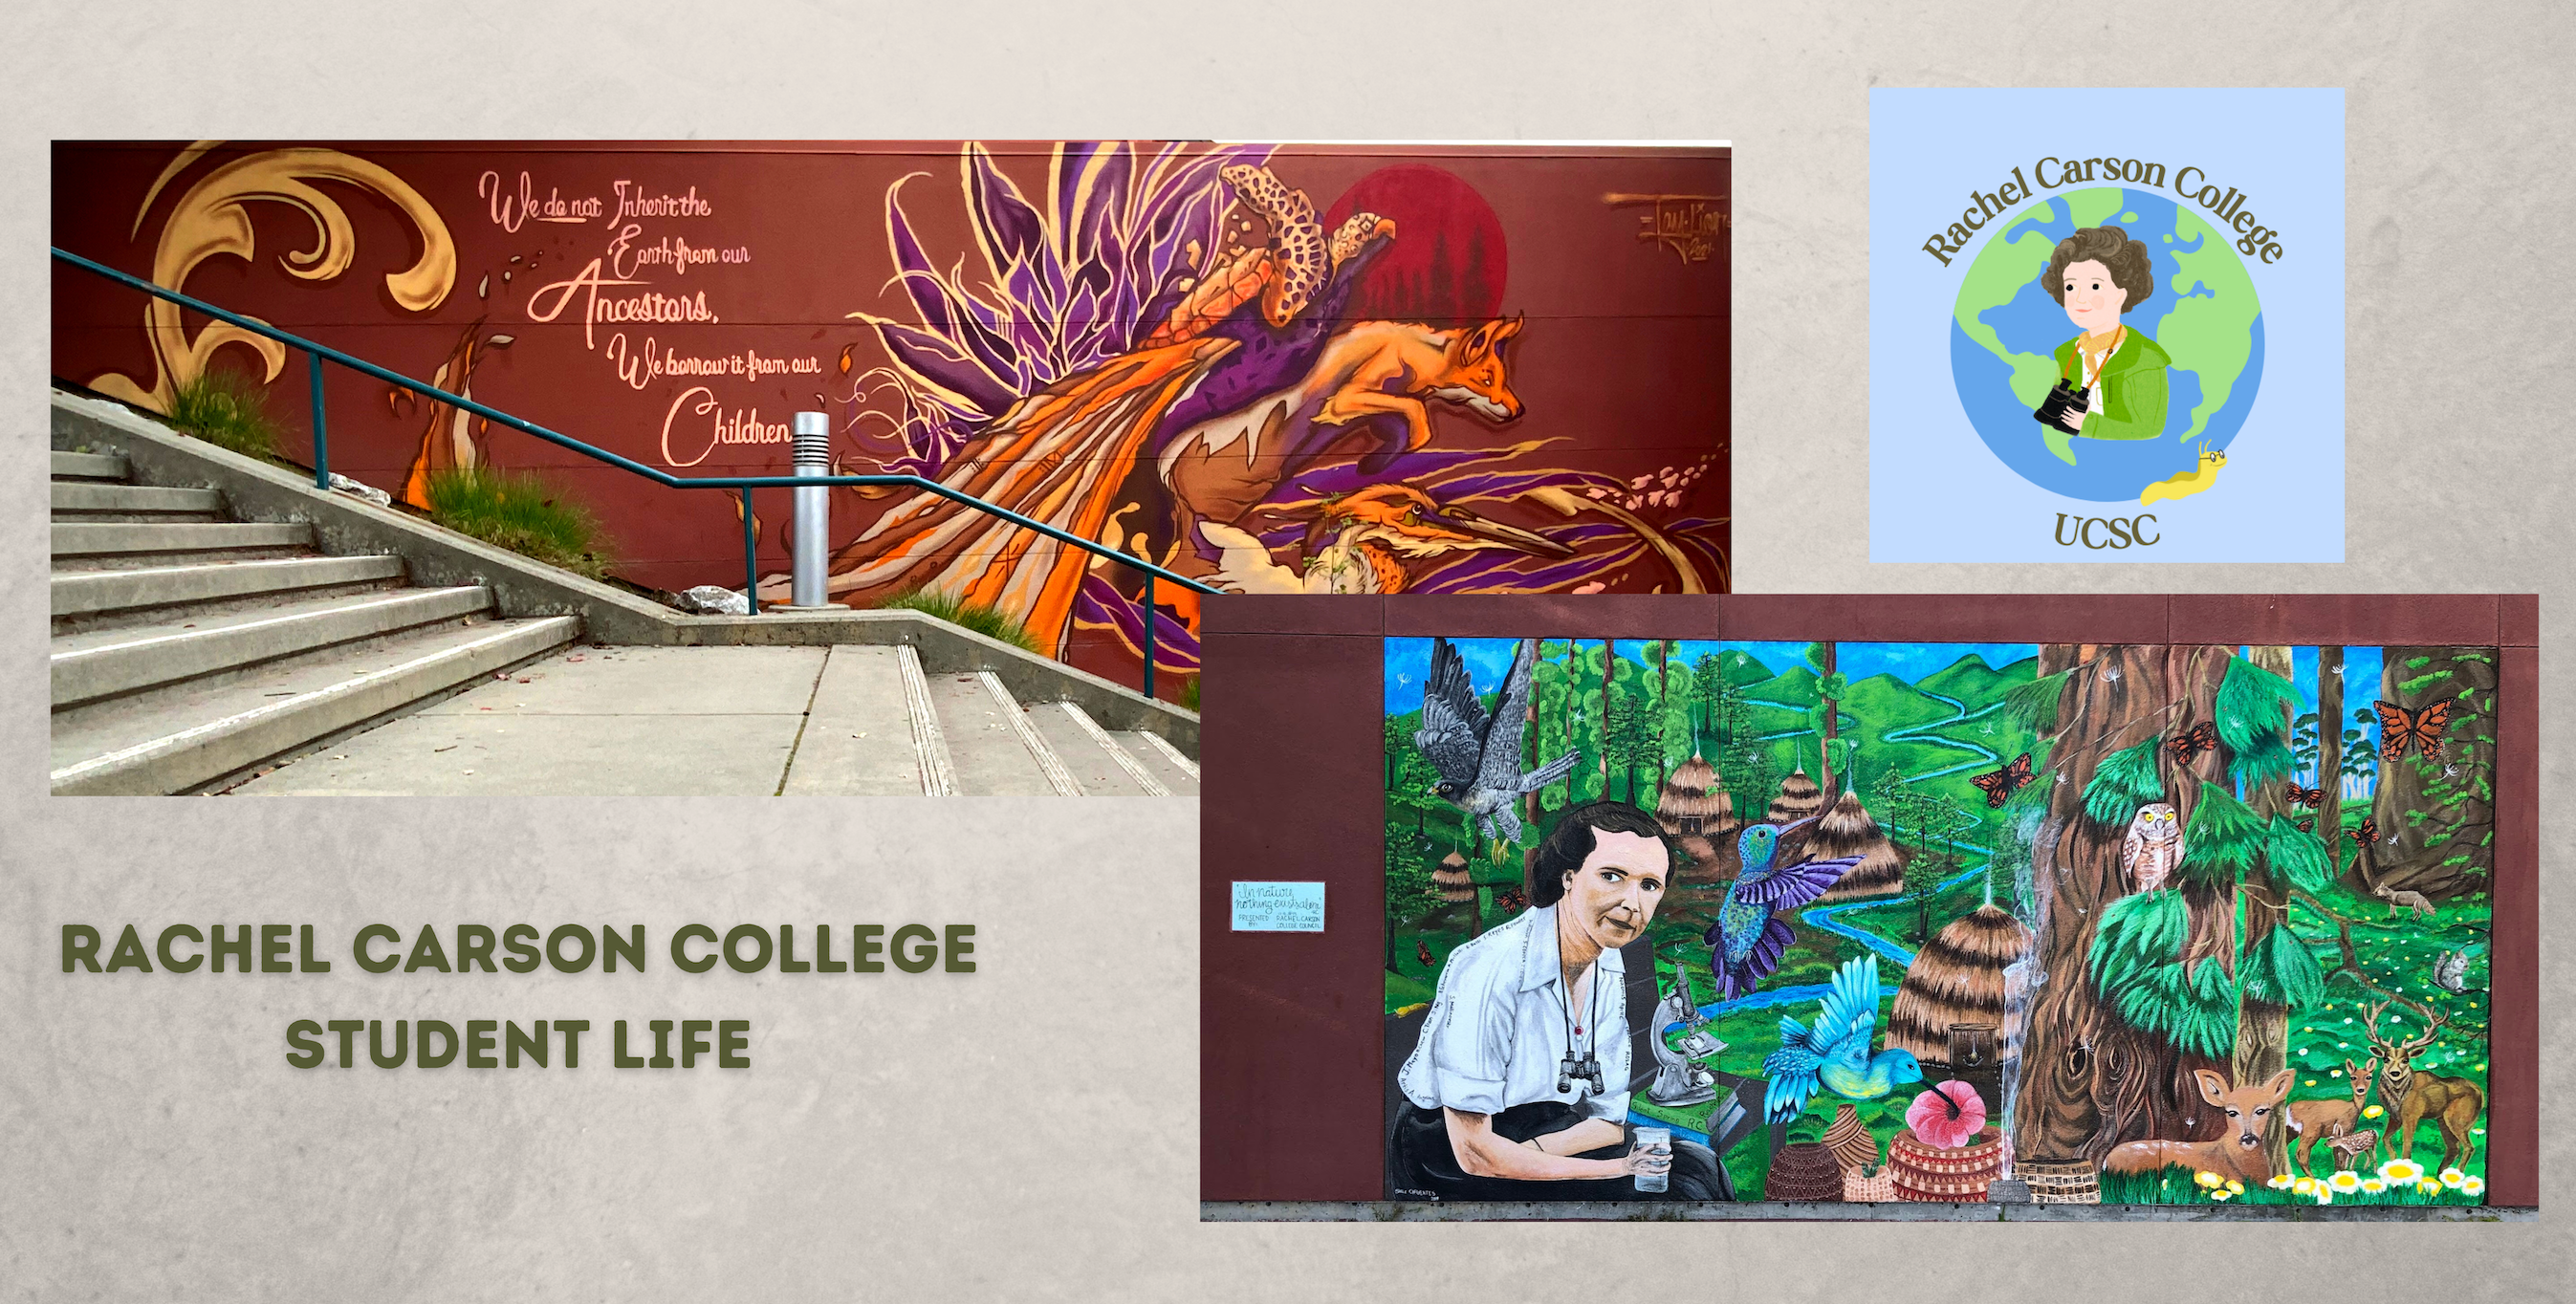 Images of two murals within Rachel Carson College Locations. First mural is of a Native American Proverb which reads: "We do not inherit the Earth from our ancestors, we borrow it from our children." The second is a student mural of environmentalist and name sake, Rachel Carson surrounded by redwoods and different animals. The picture contains the Rachel Carson College, Student Life logo of a lotus flower formed as a fist. On the other side, Rachel Carson College Student Life is written. 